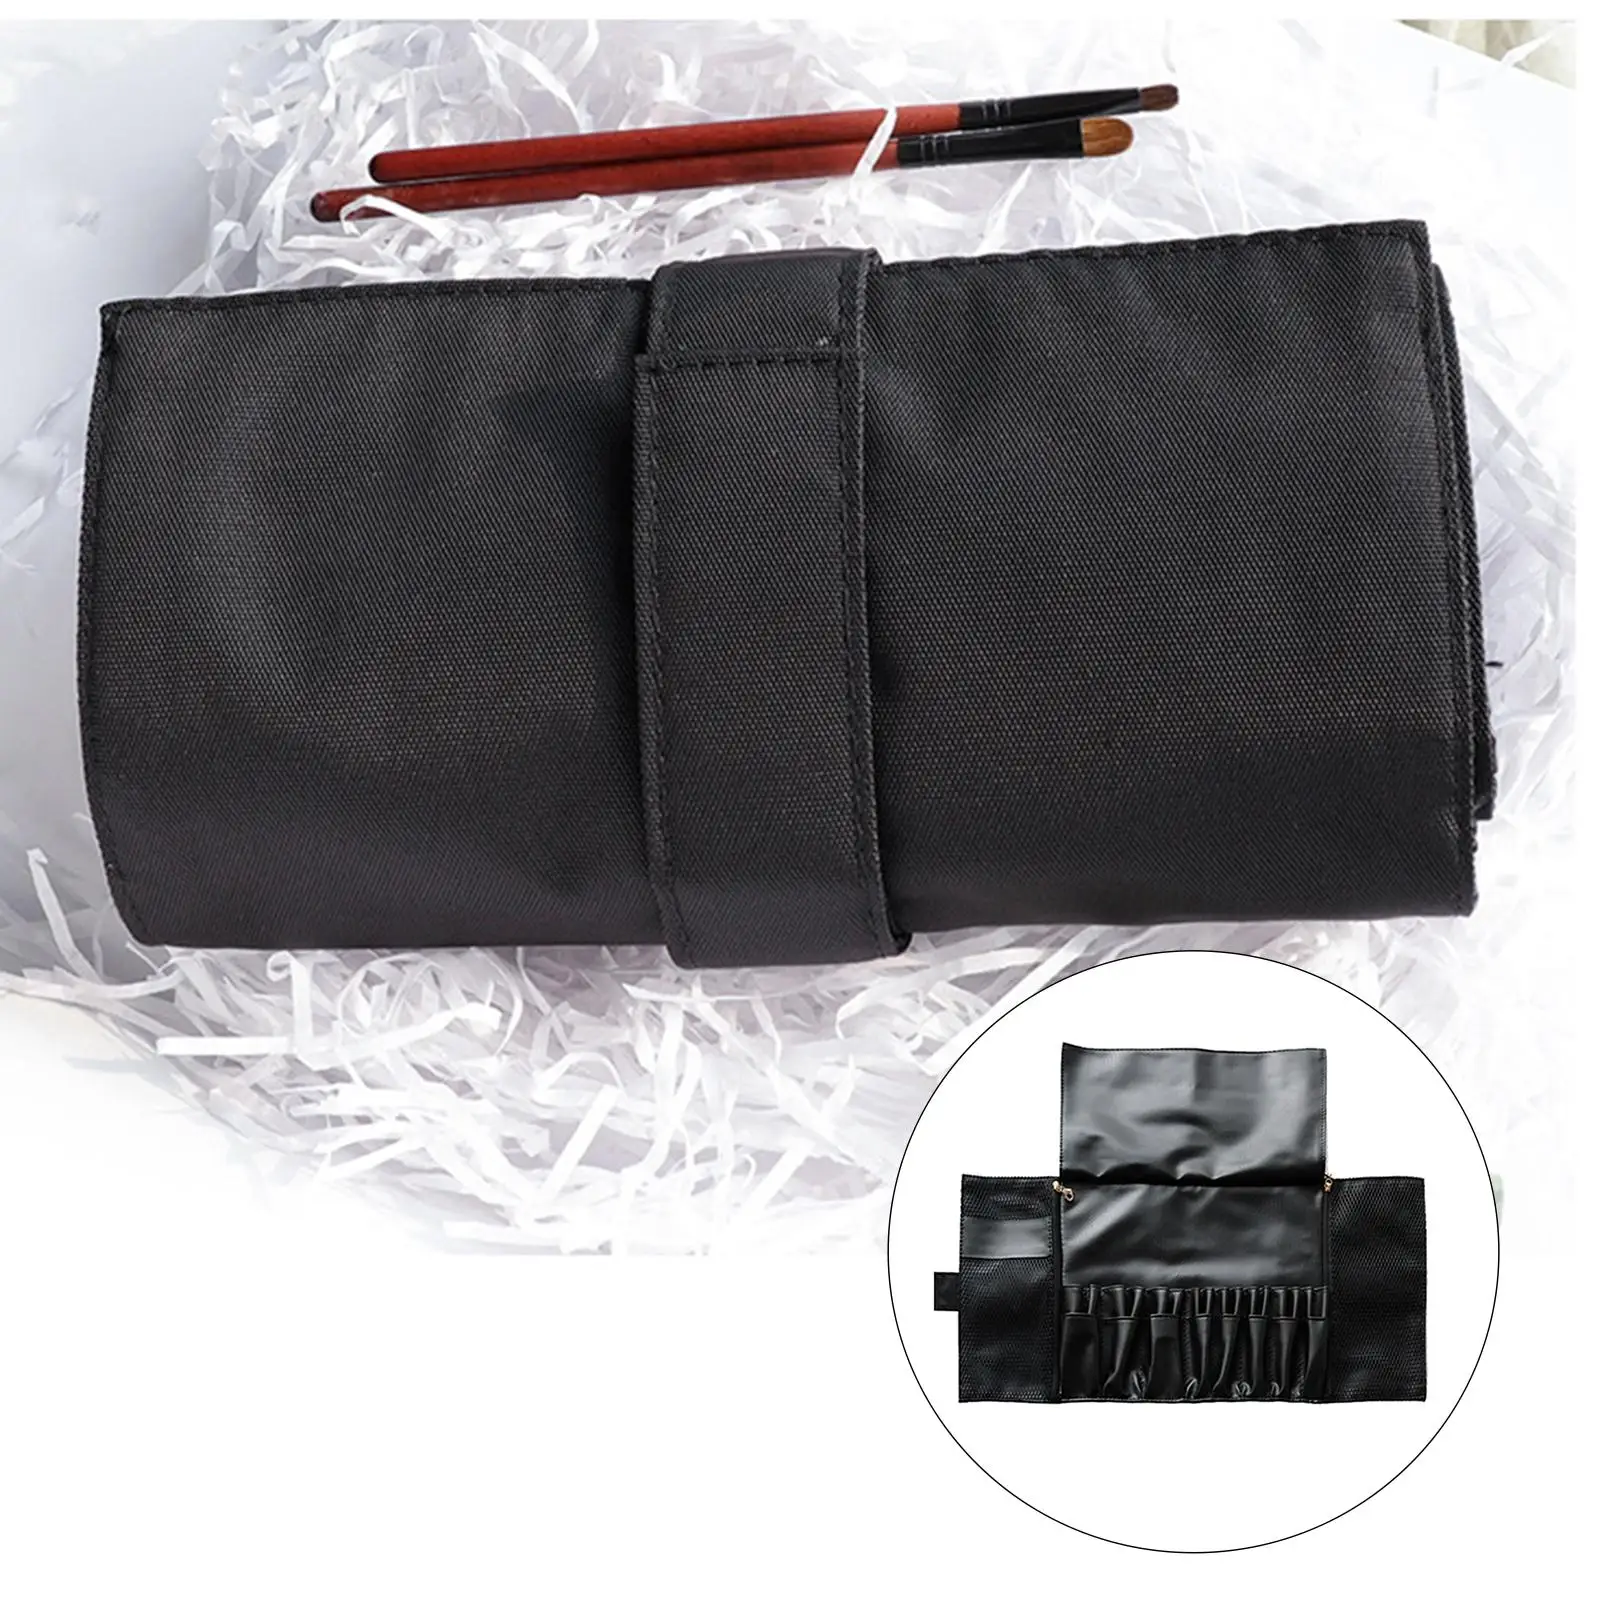  Organizer ,24 Pockets, Rolling Case, PU Leather  Portable Professional Holder for Fashion  (Without Brush)